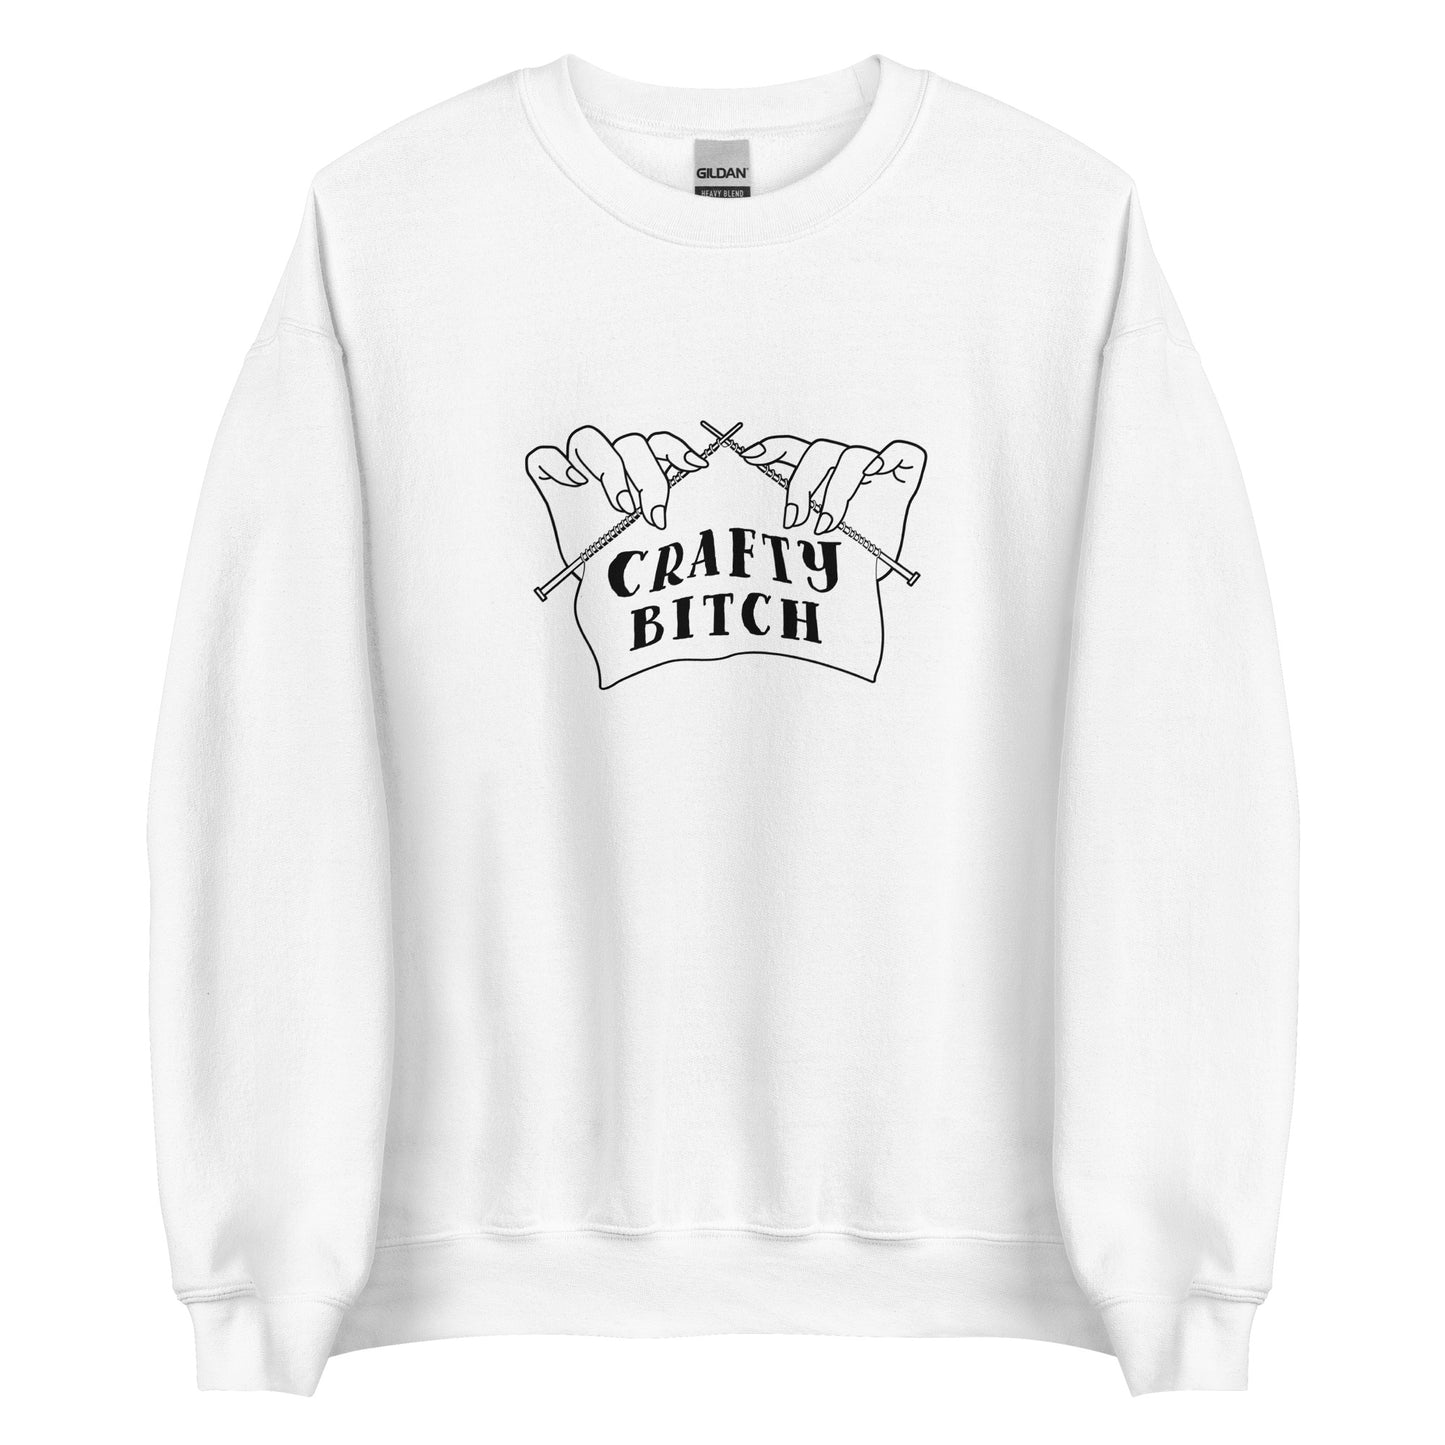 A white crewneck sweatshirt featuring a single-color illustration of a pair of hands holding knitting needles. Fabric on the needles features text that reads "crafty bitch".